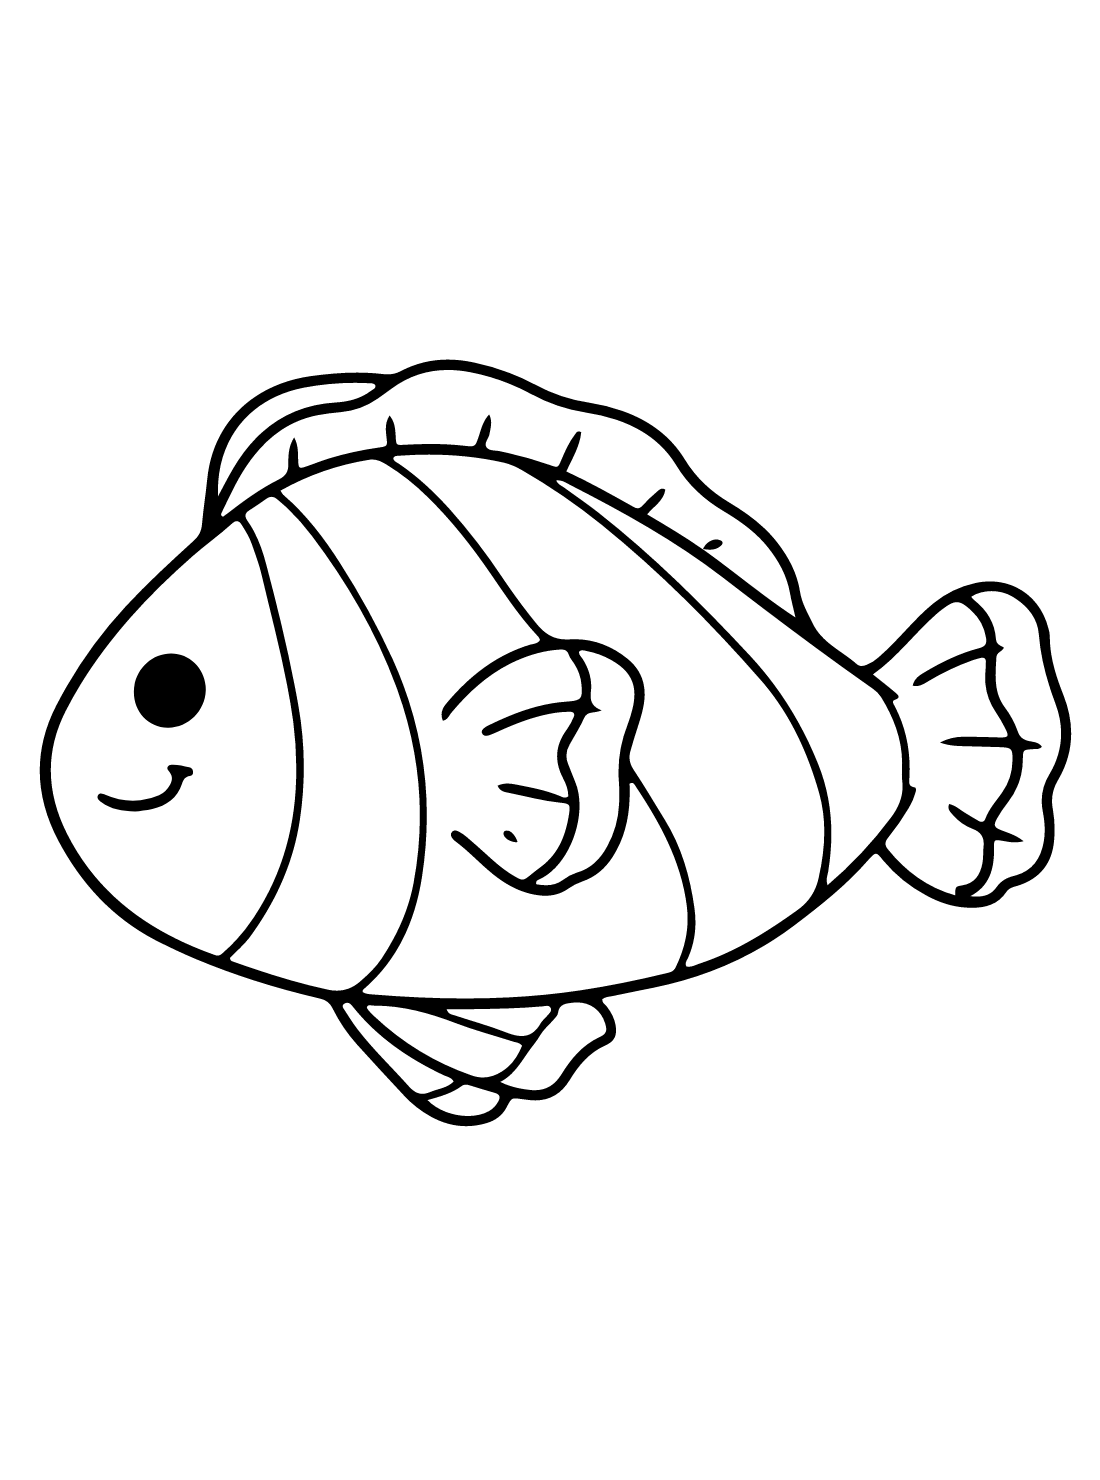 Clownfish Coloring Pages Free Online For Kids